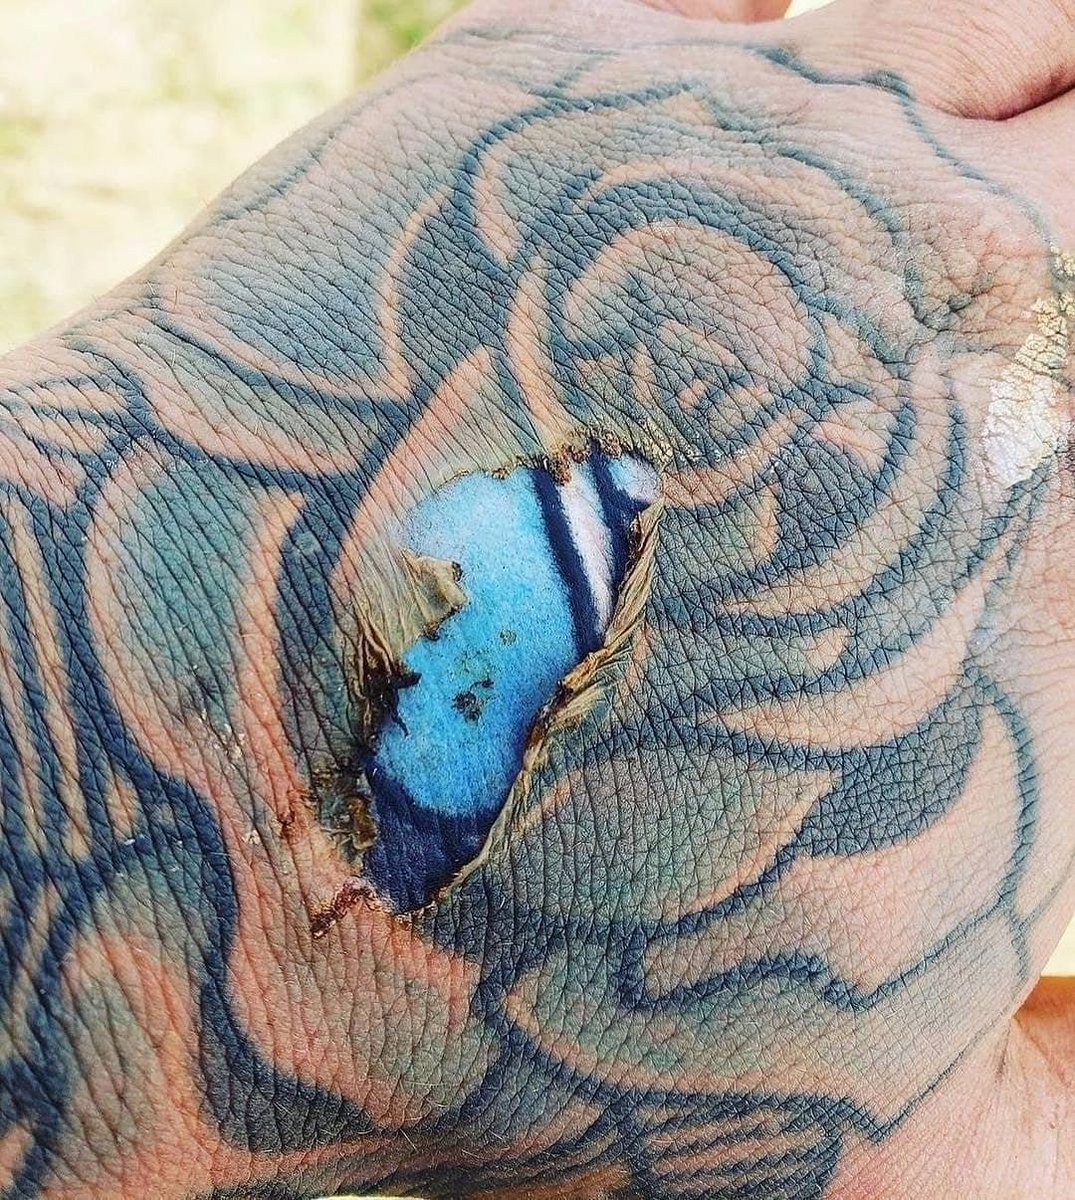 Epidermal burn of the hand exposes bright colour of tattoo ink embedded in the dermal layer of the skin.